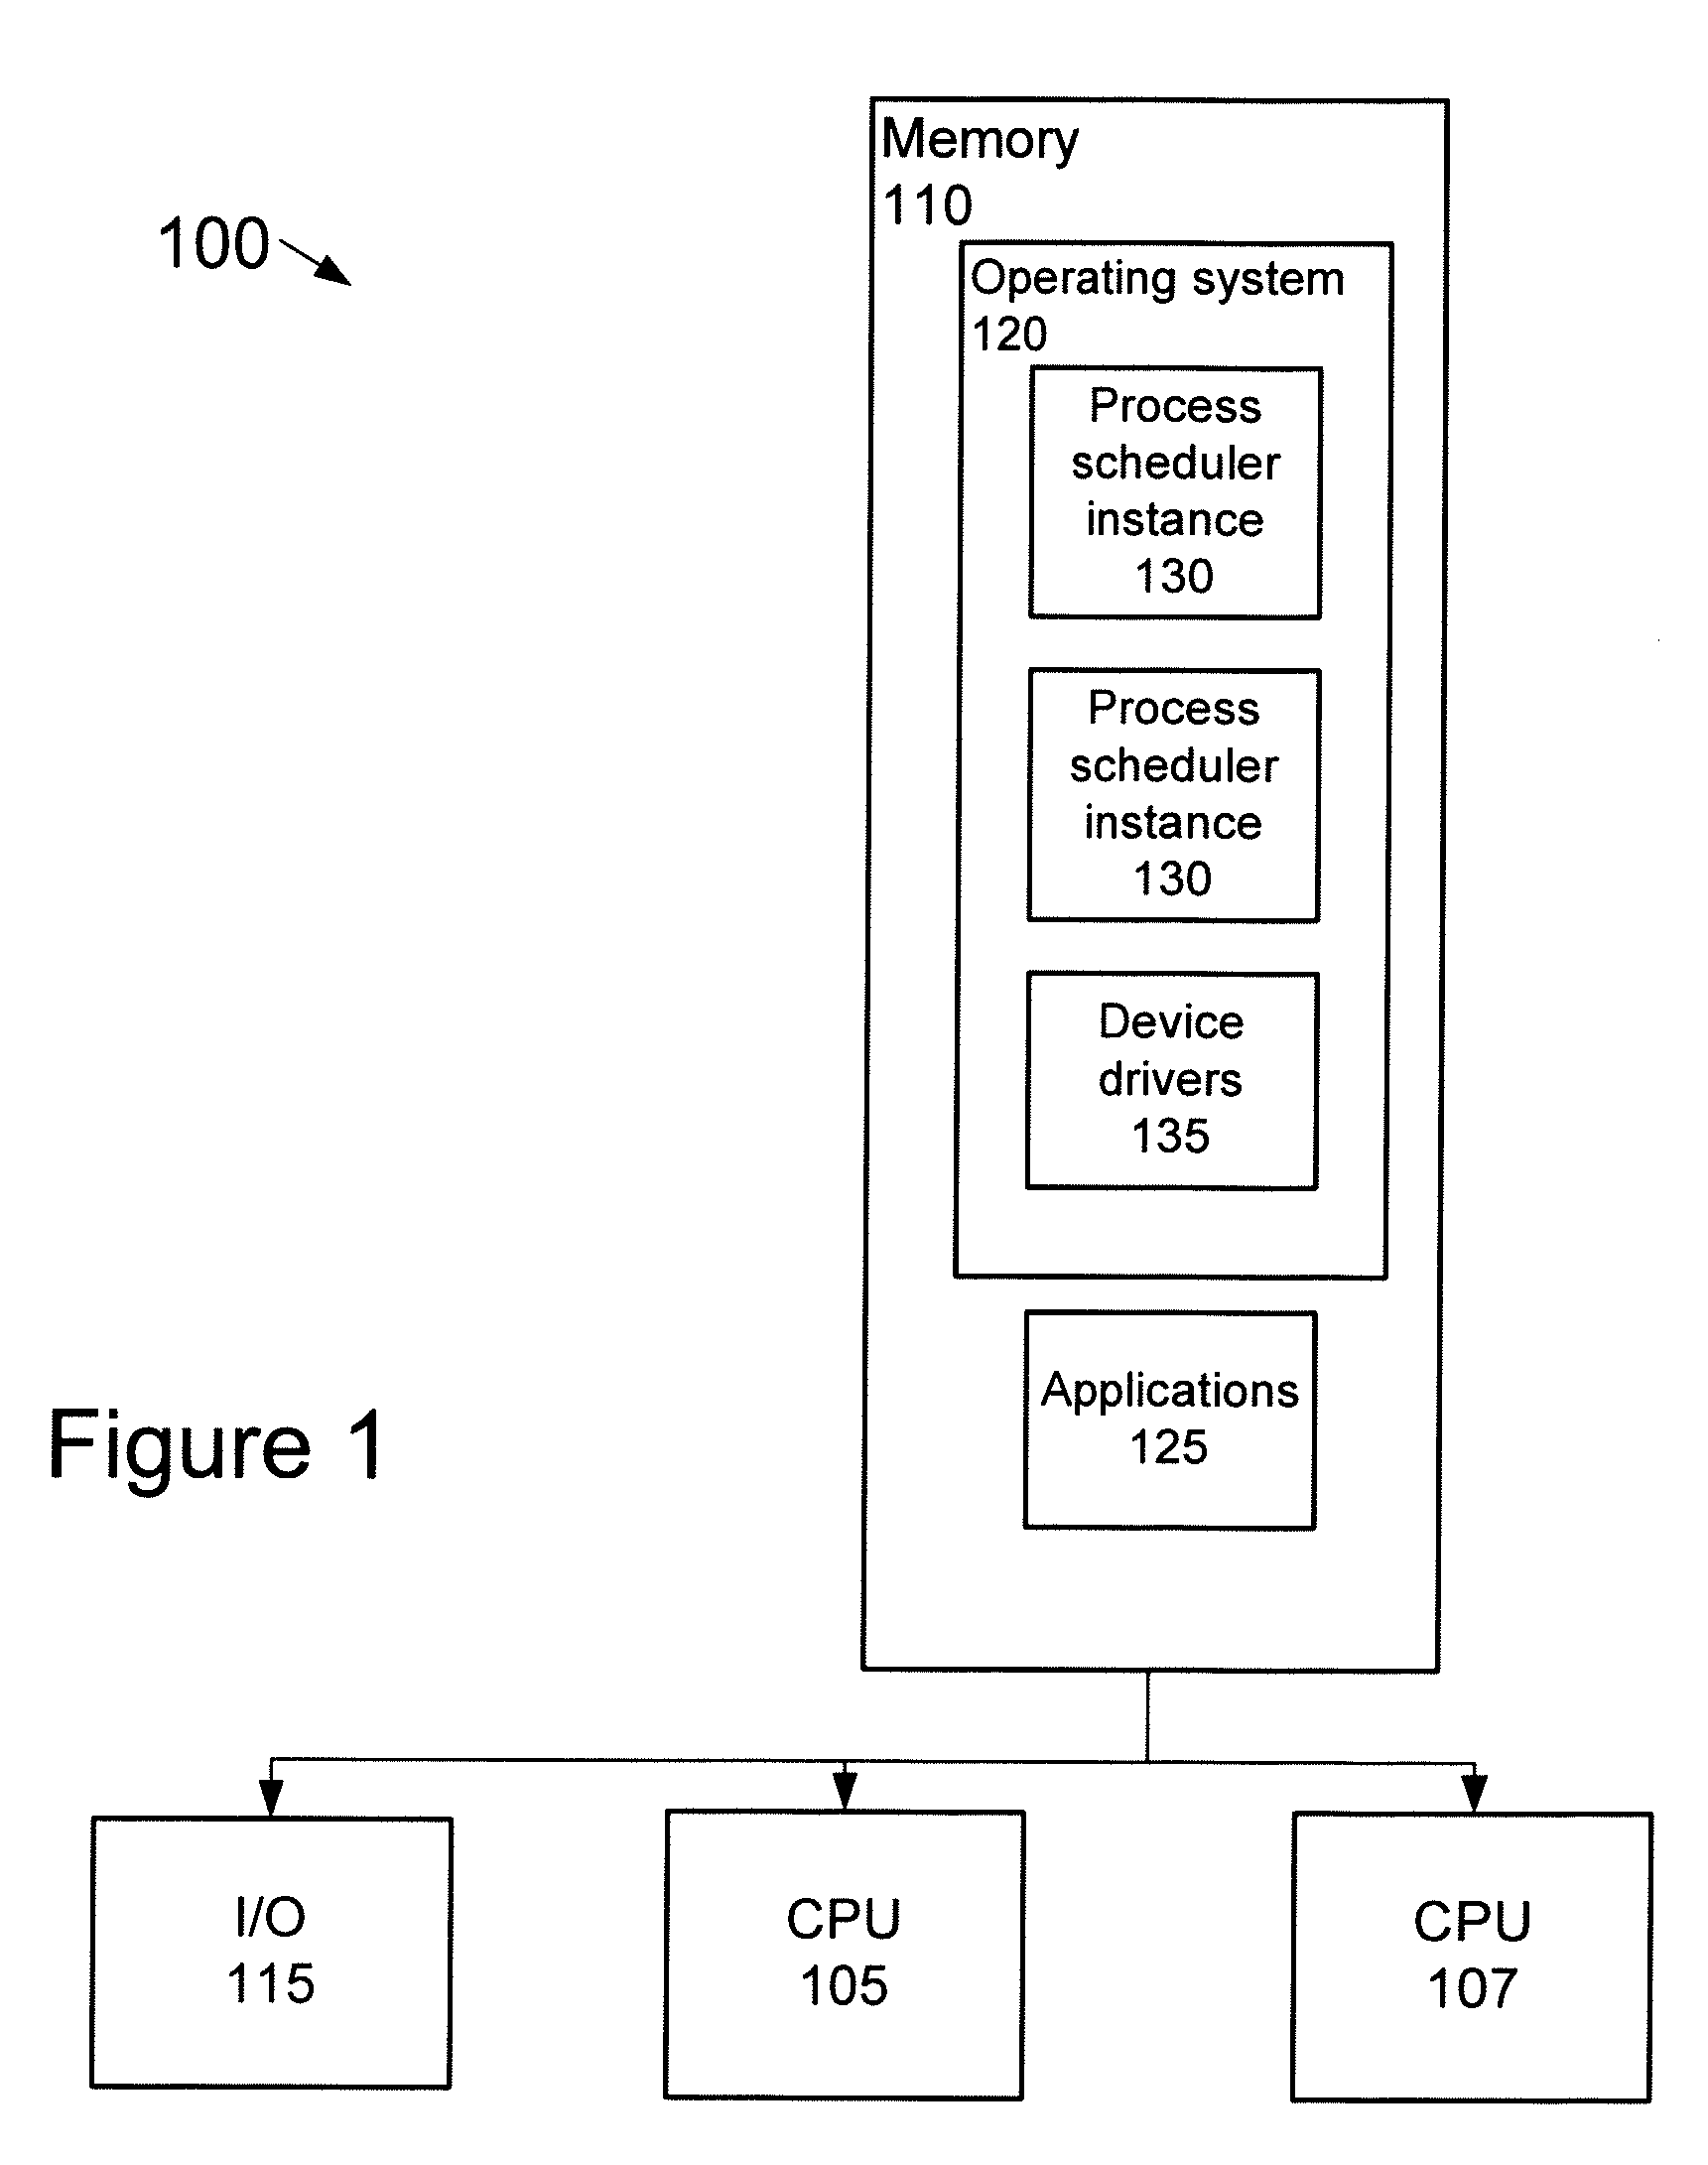 Adaptive partitioning scheduler for multiprocessing system